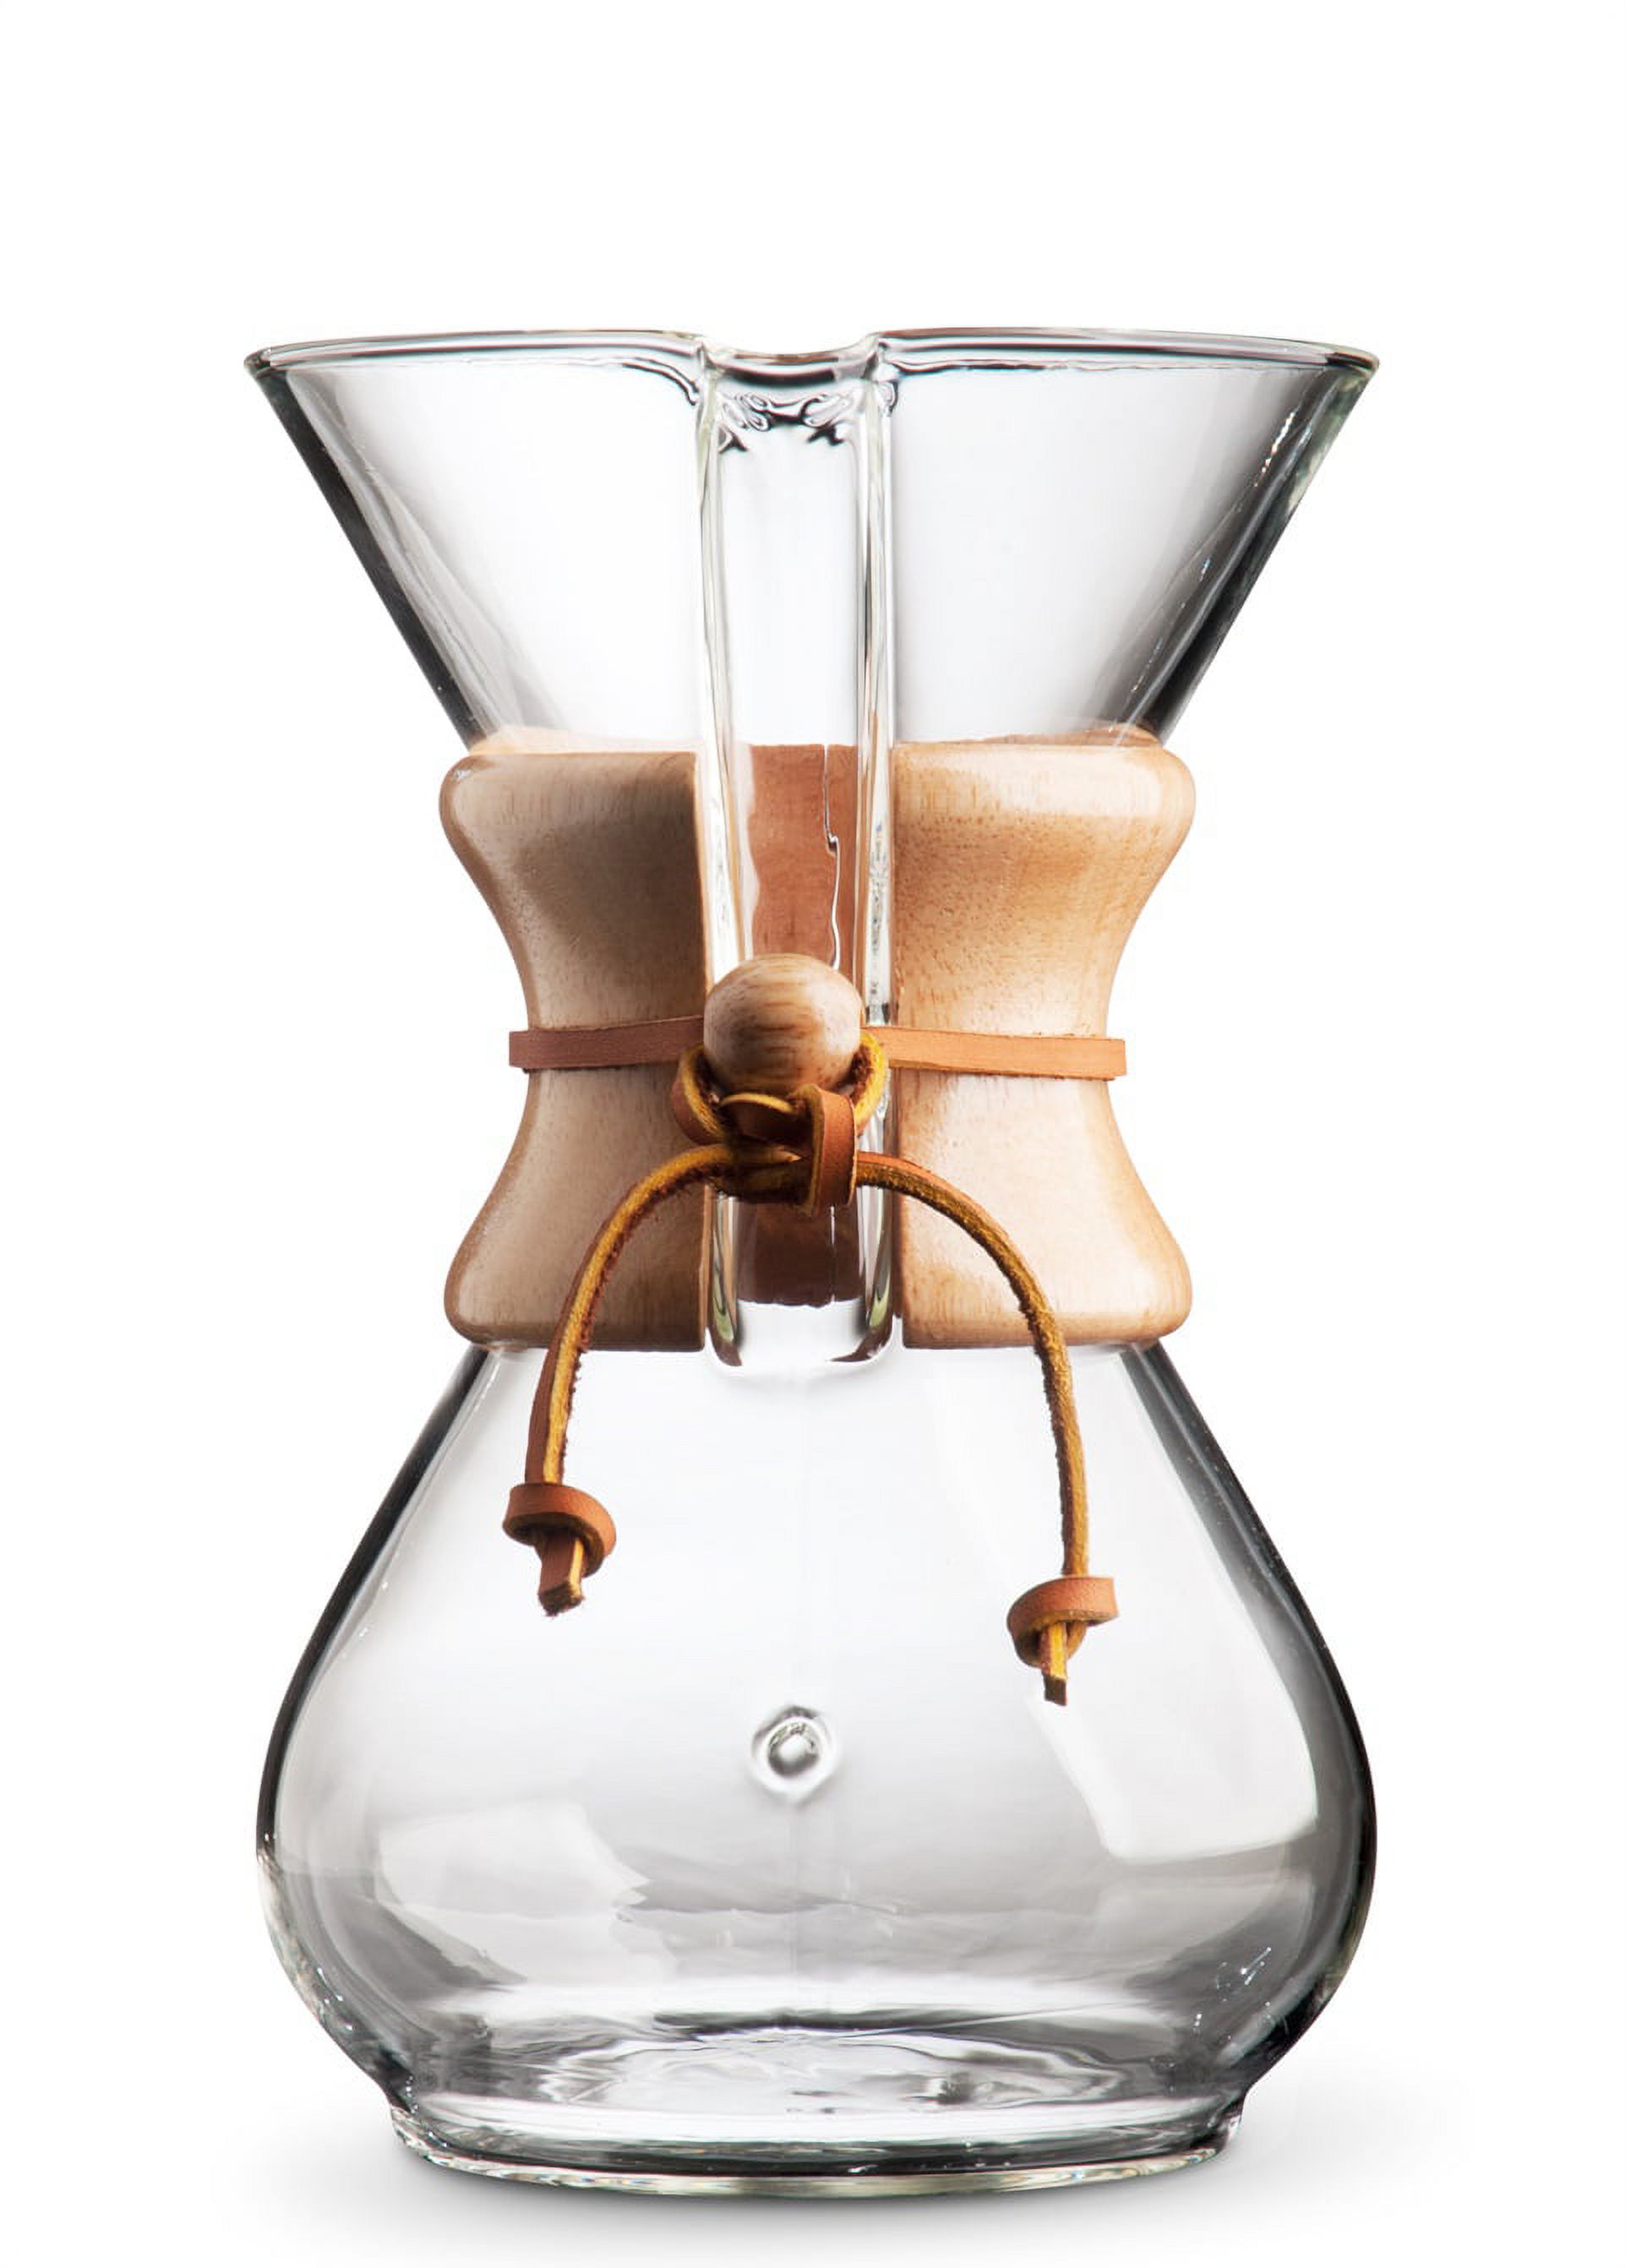 Chemex 6-Cup Classic Series Glass Coffee Maker - image 3 of 5